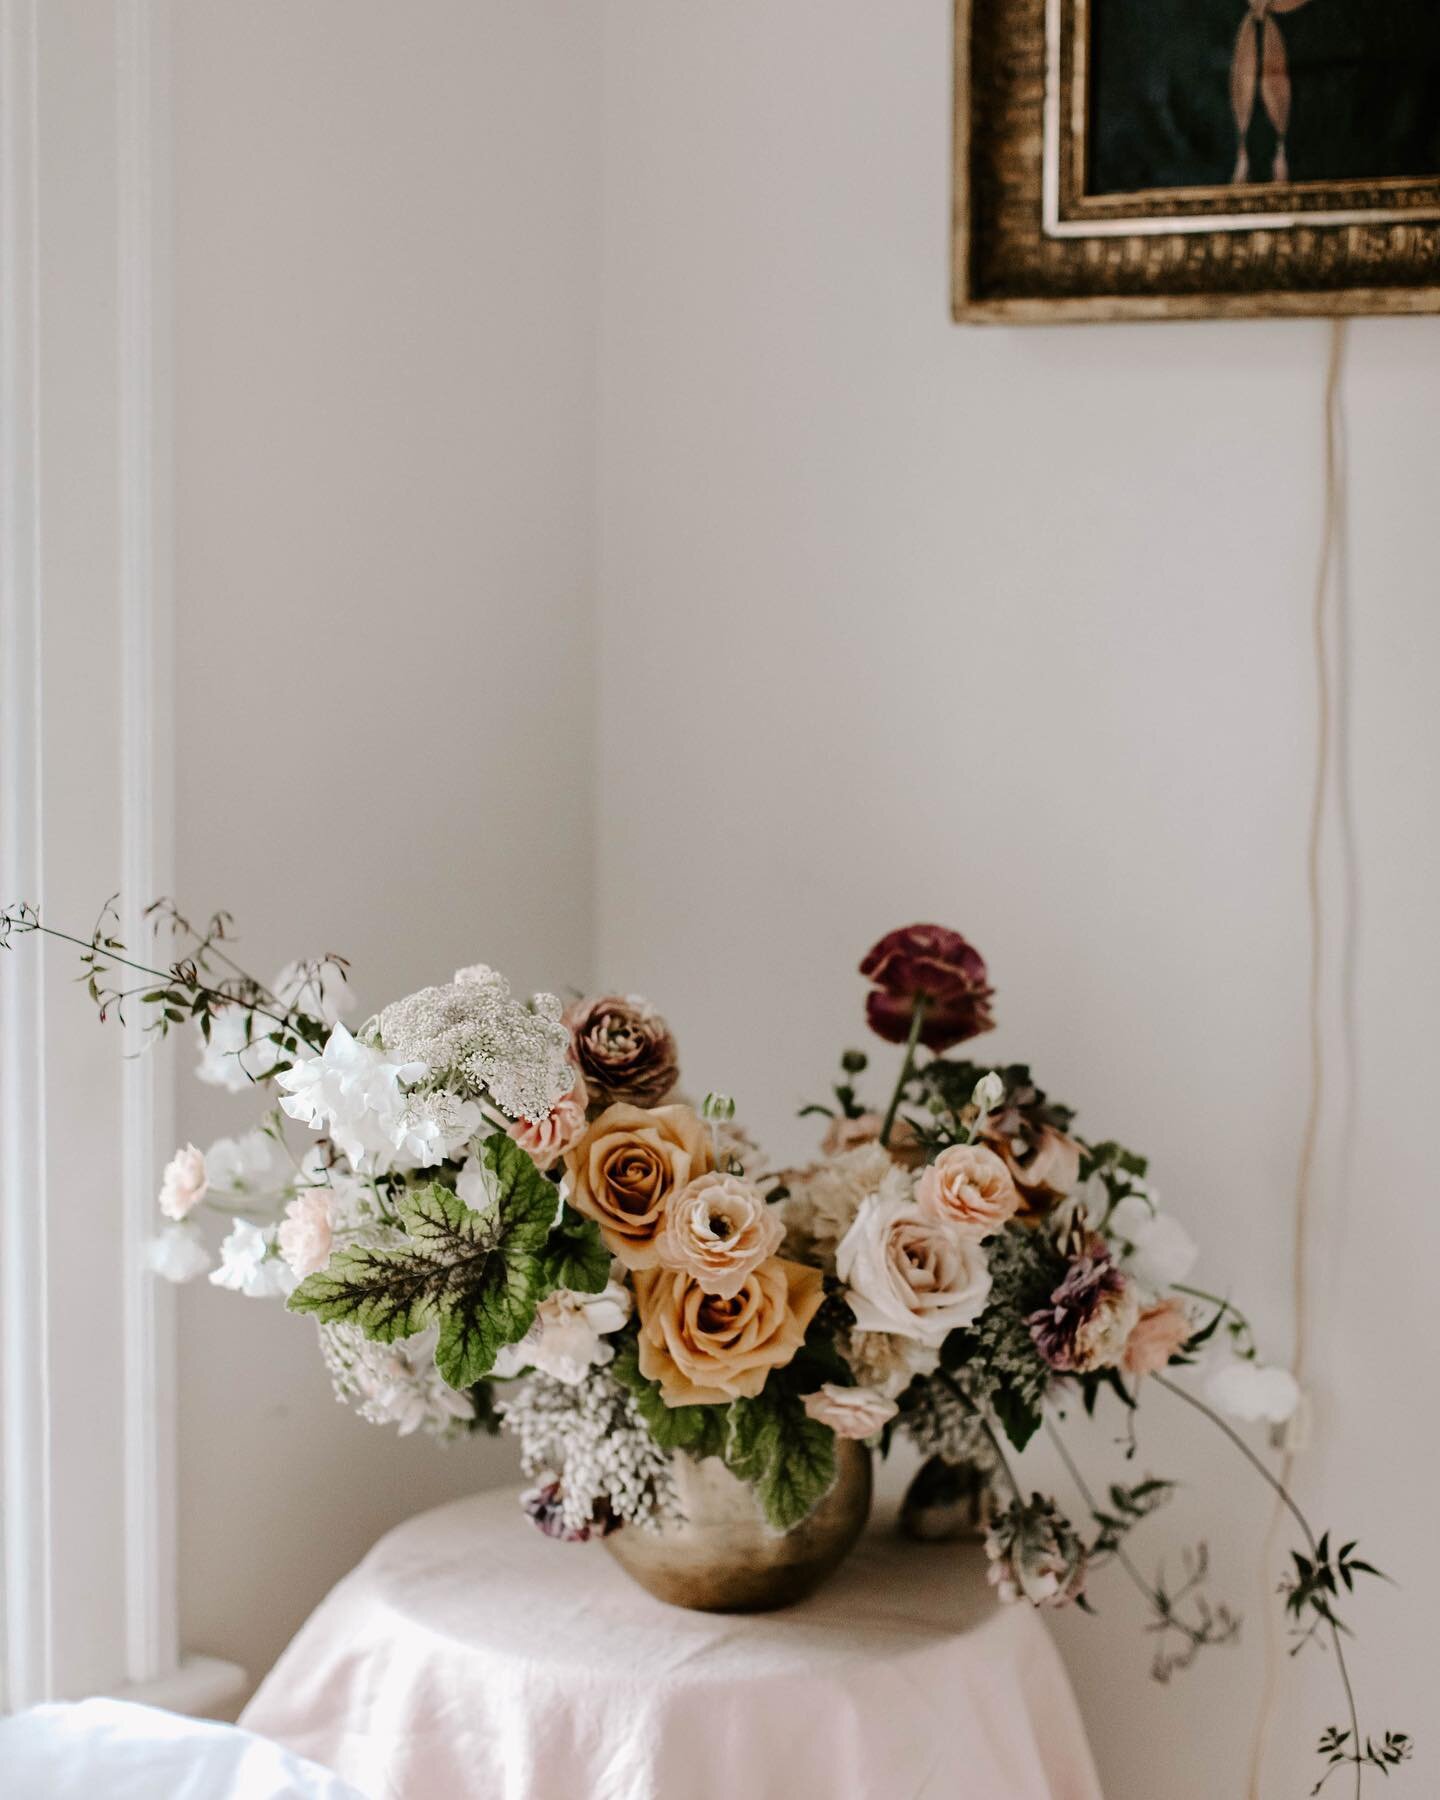 One of my fav, moody arrangements shot by @aliciagbur in her space. If you&rsquo;re looking for some major home design inspo, follow her @boxwoodpineco account! Her home is a fricken dream 🥰